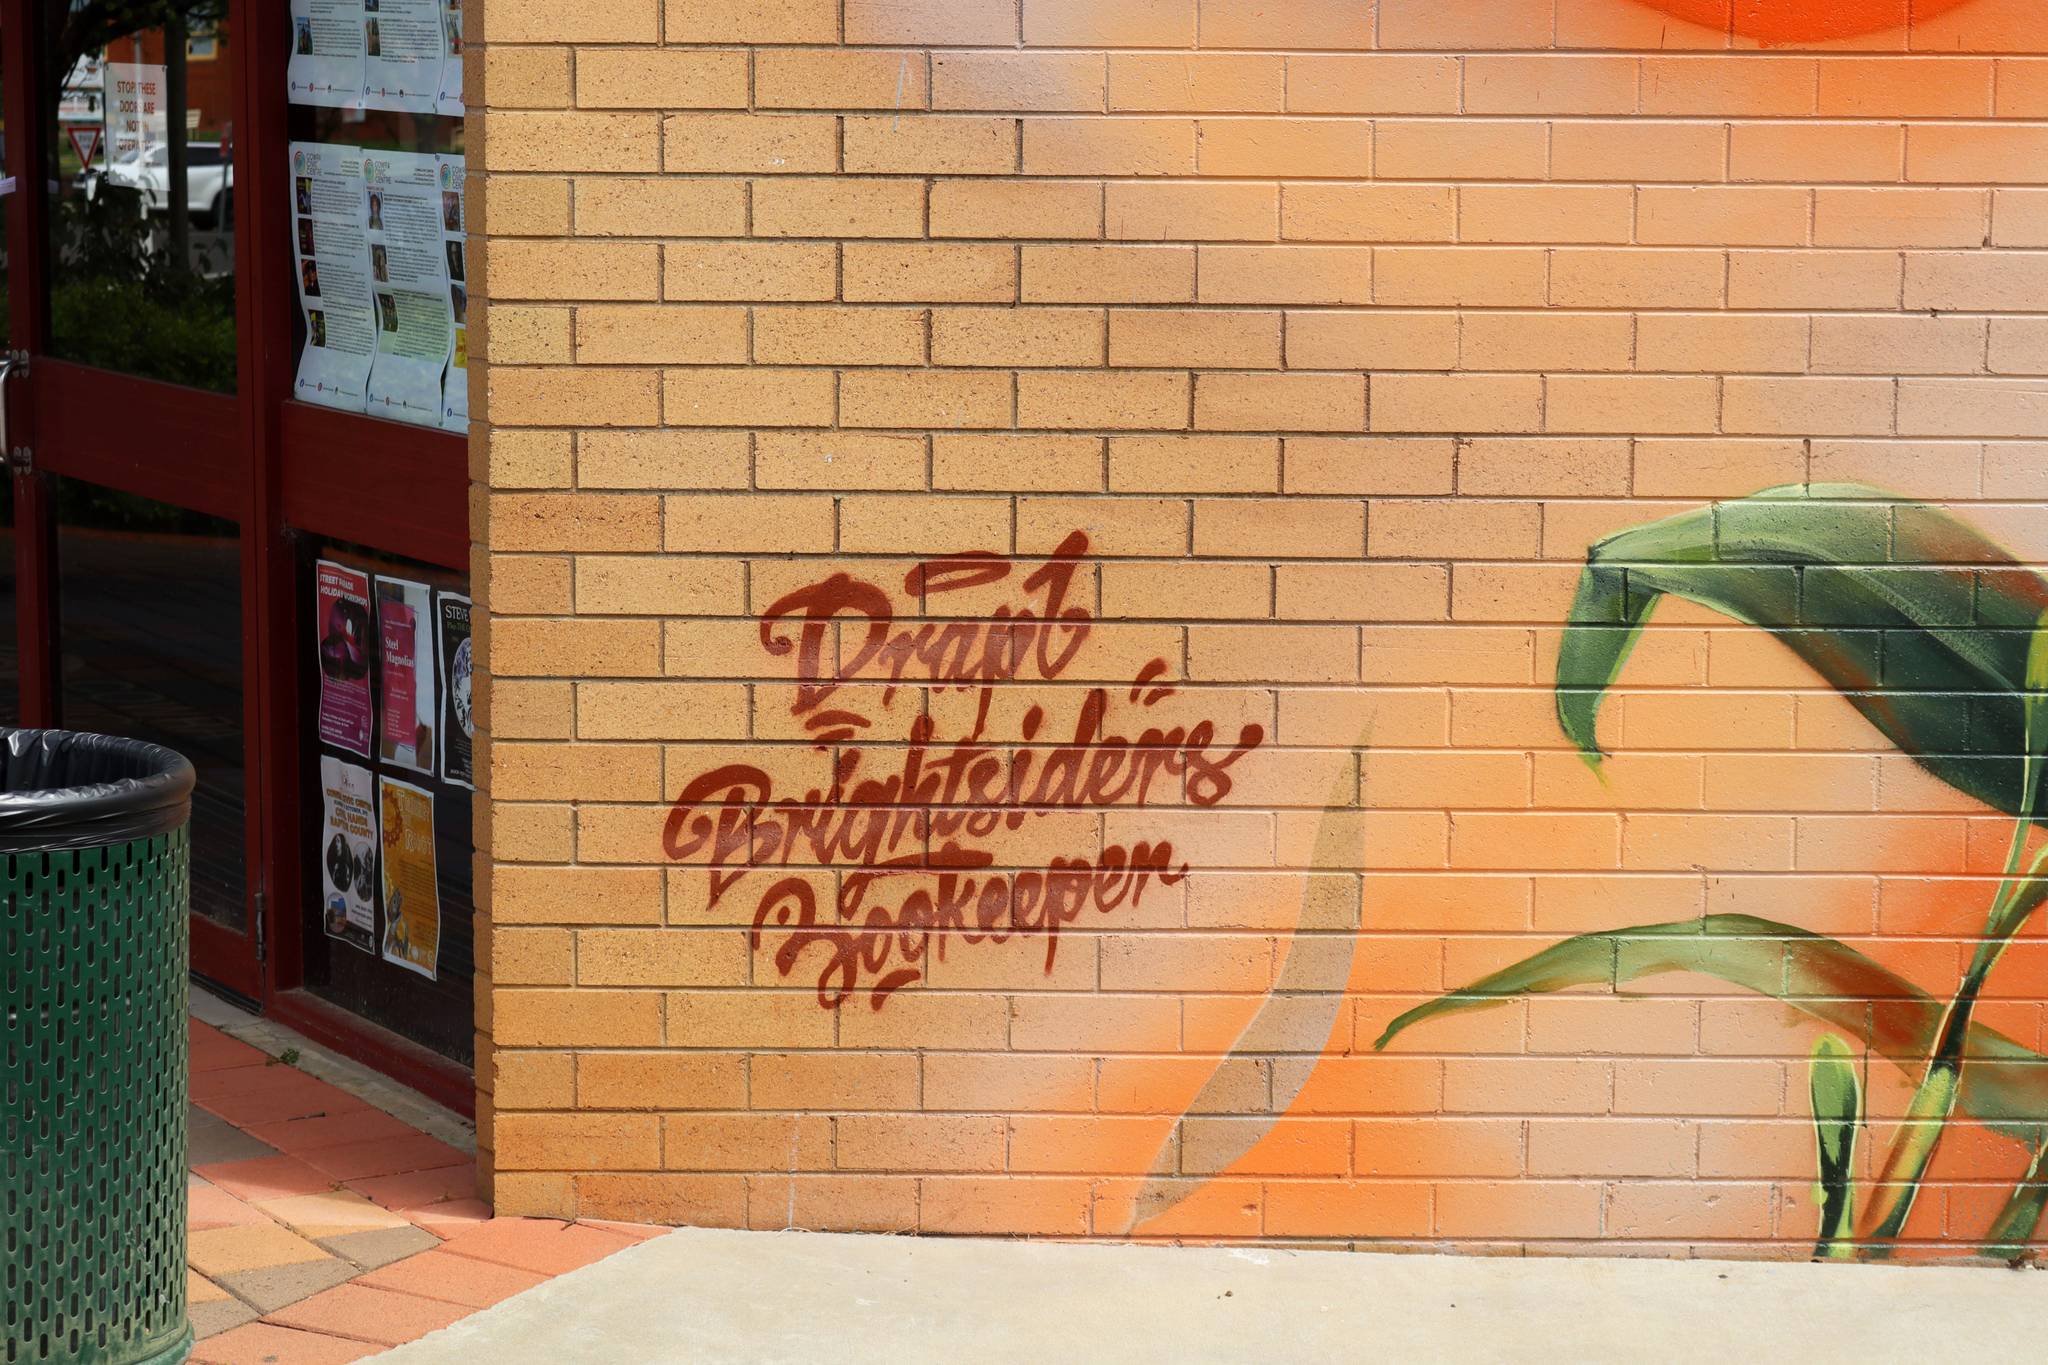 Drapl, The Zookeeper, The Brightsiders&mdash;Cowra Civic Square Mural